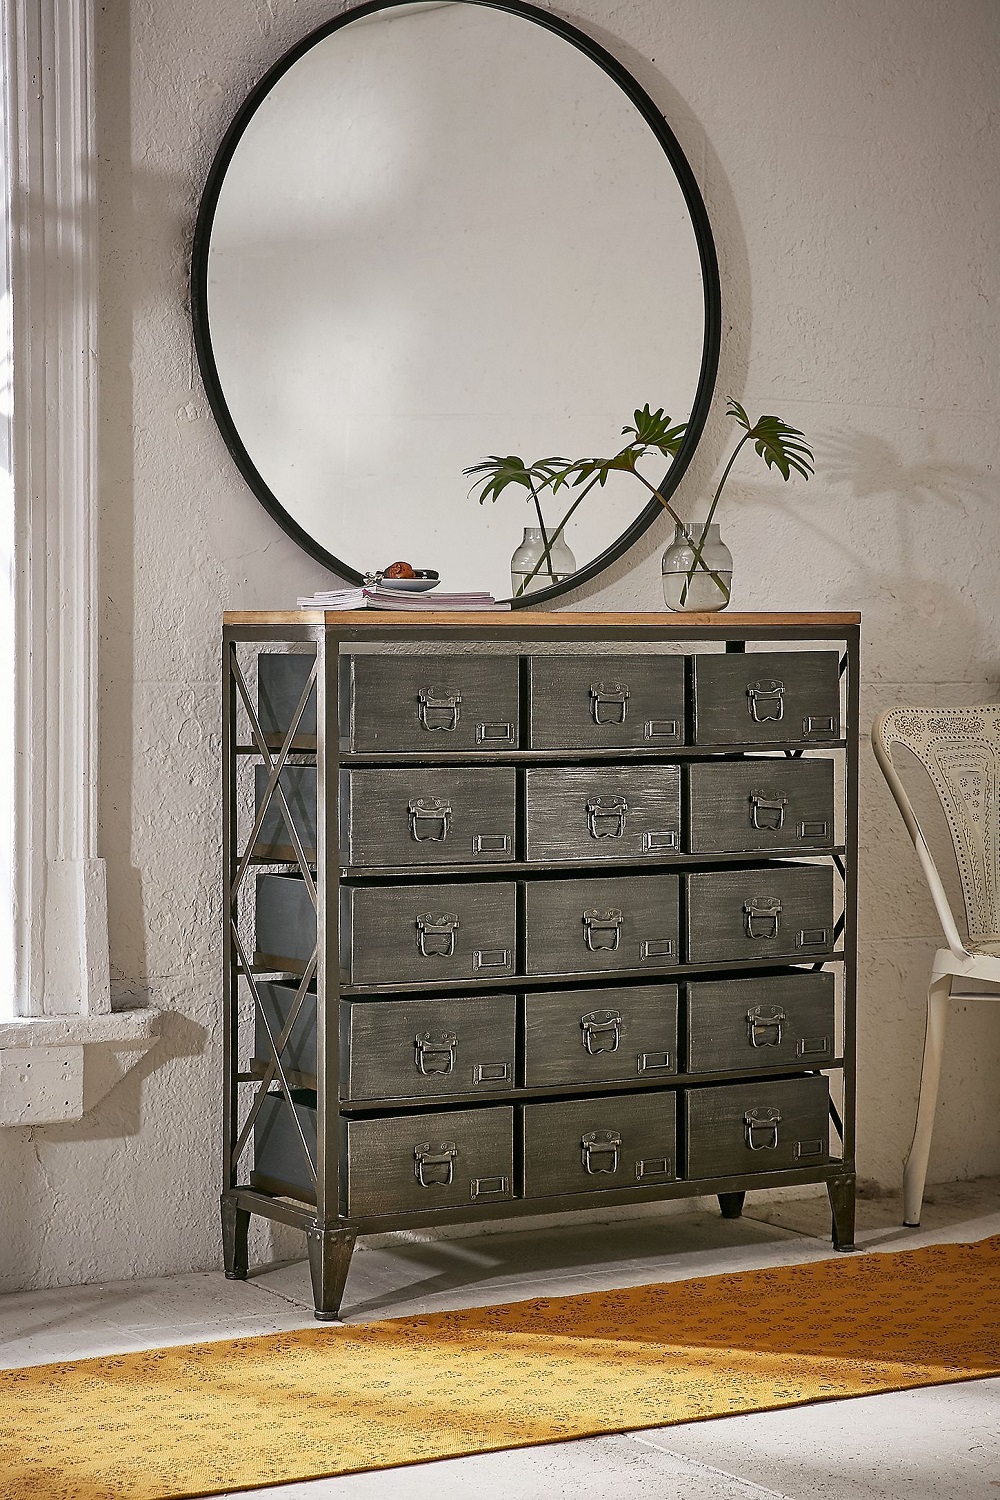 t3-64 How to use a vintage apothecary cabinet in your home décor